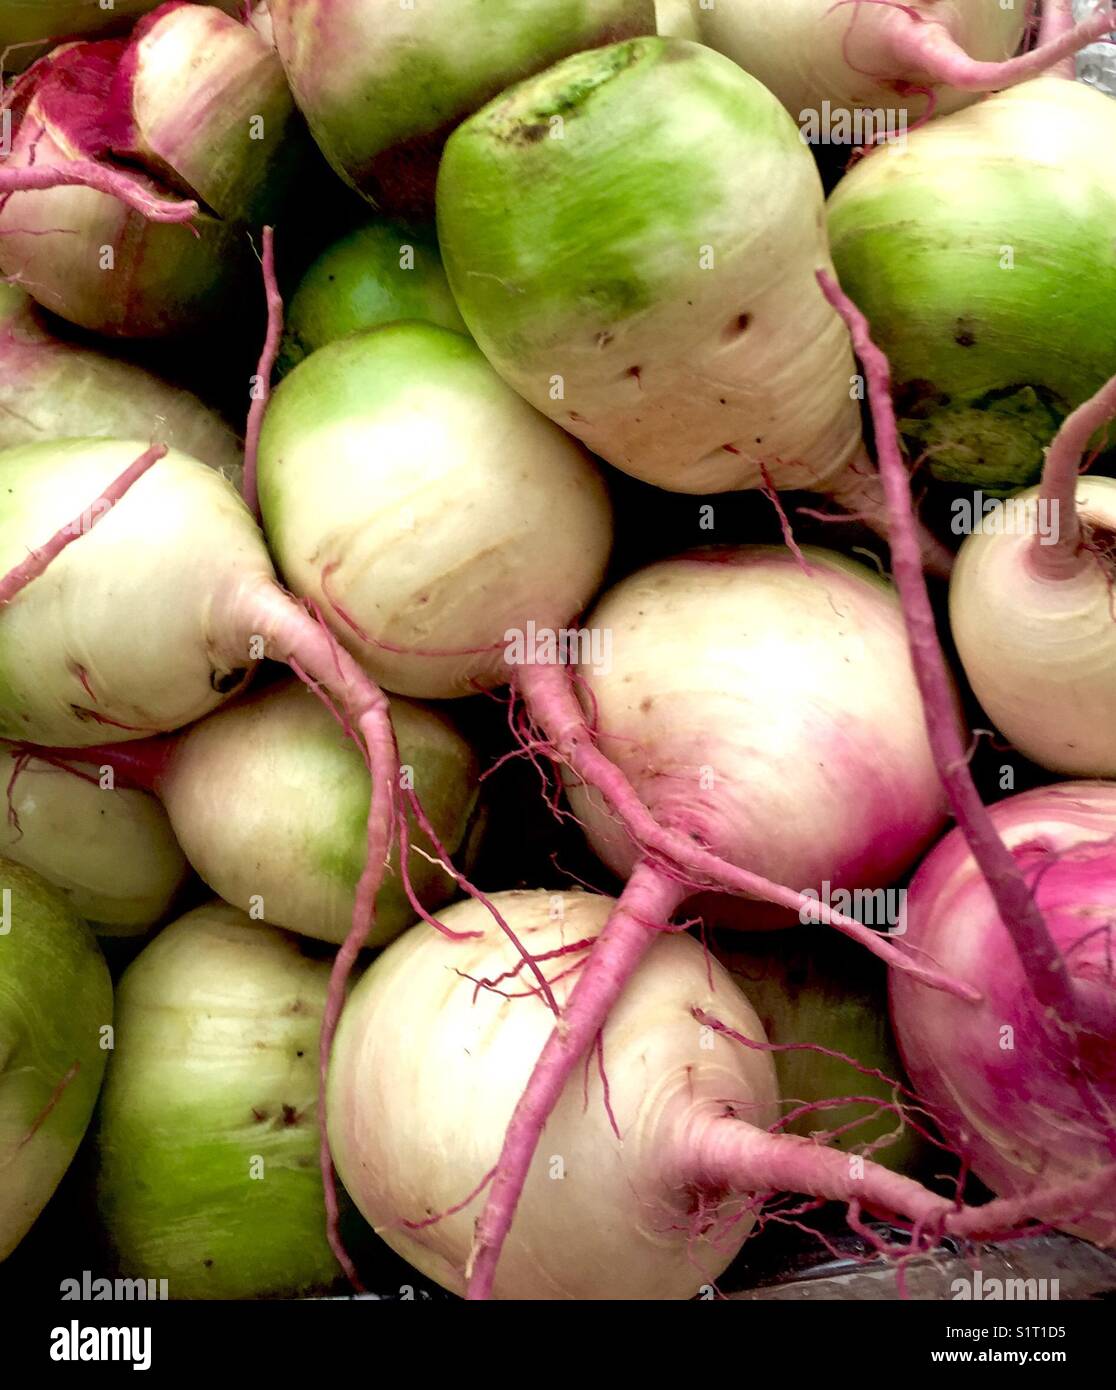 Watermelon Radishes, Green and Off-white Skin, Red Interior, pink and off-white roots Stock Photo